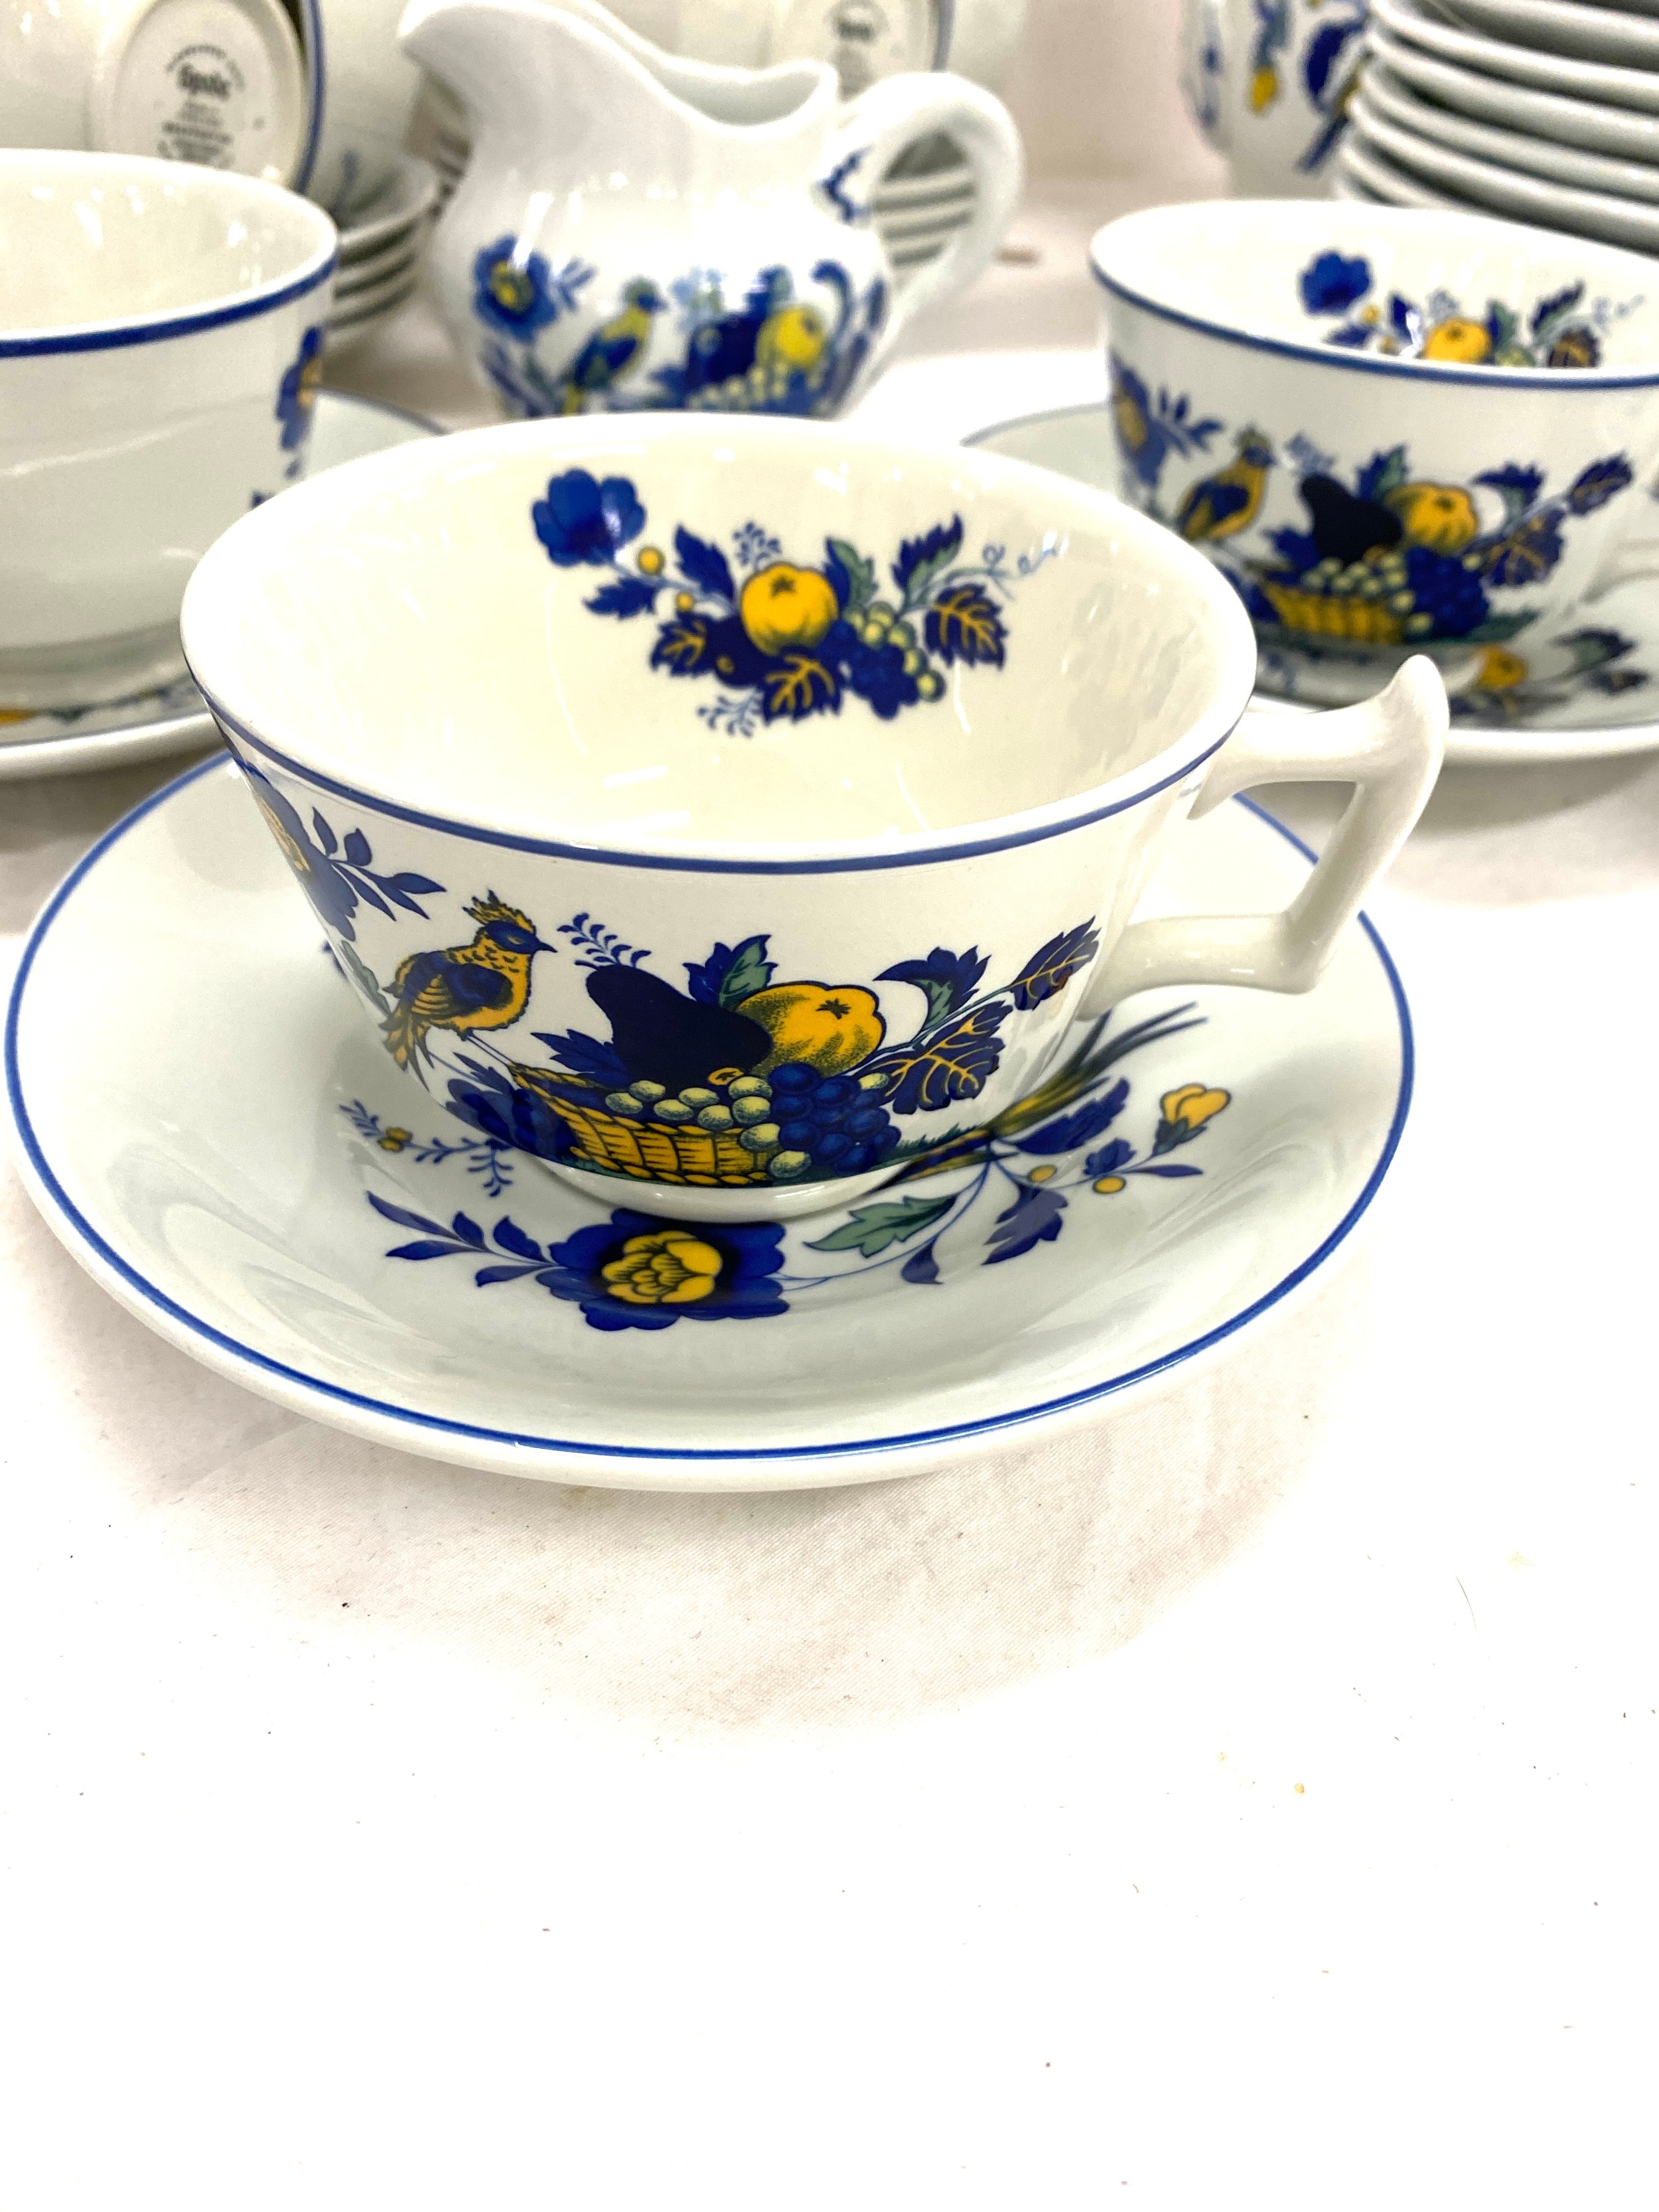 Spode Blue Bird s3274 c1838 - 16 cups 31 saucers coffee pot 7 side plates, 1 sandwich plate - Image 3 of 7